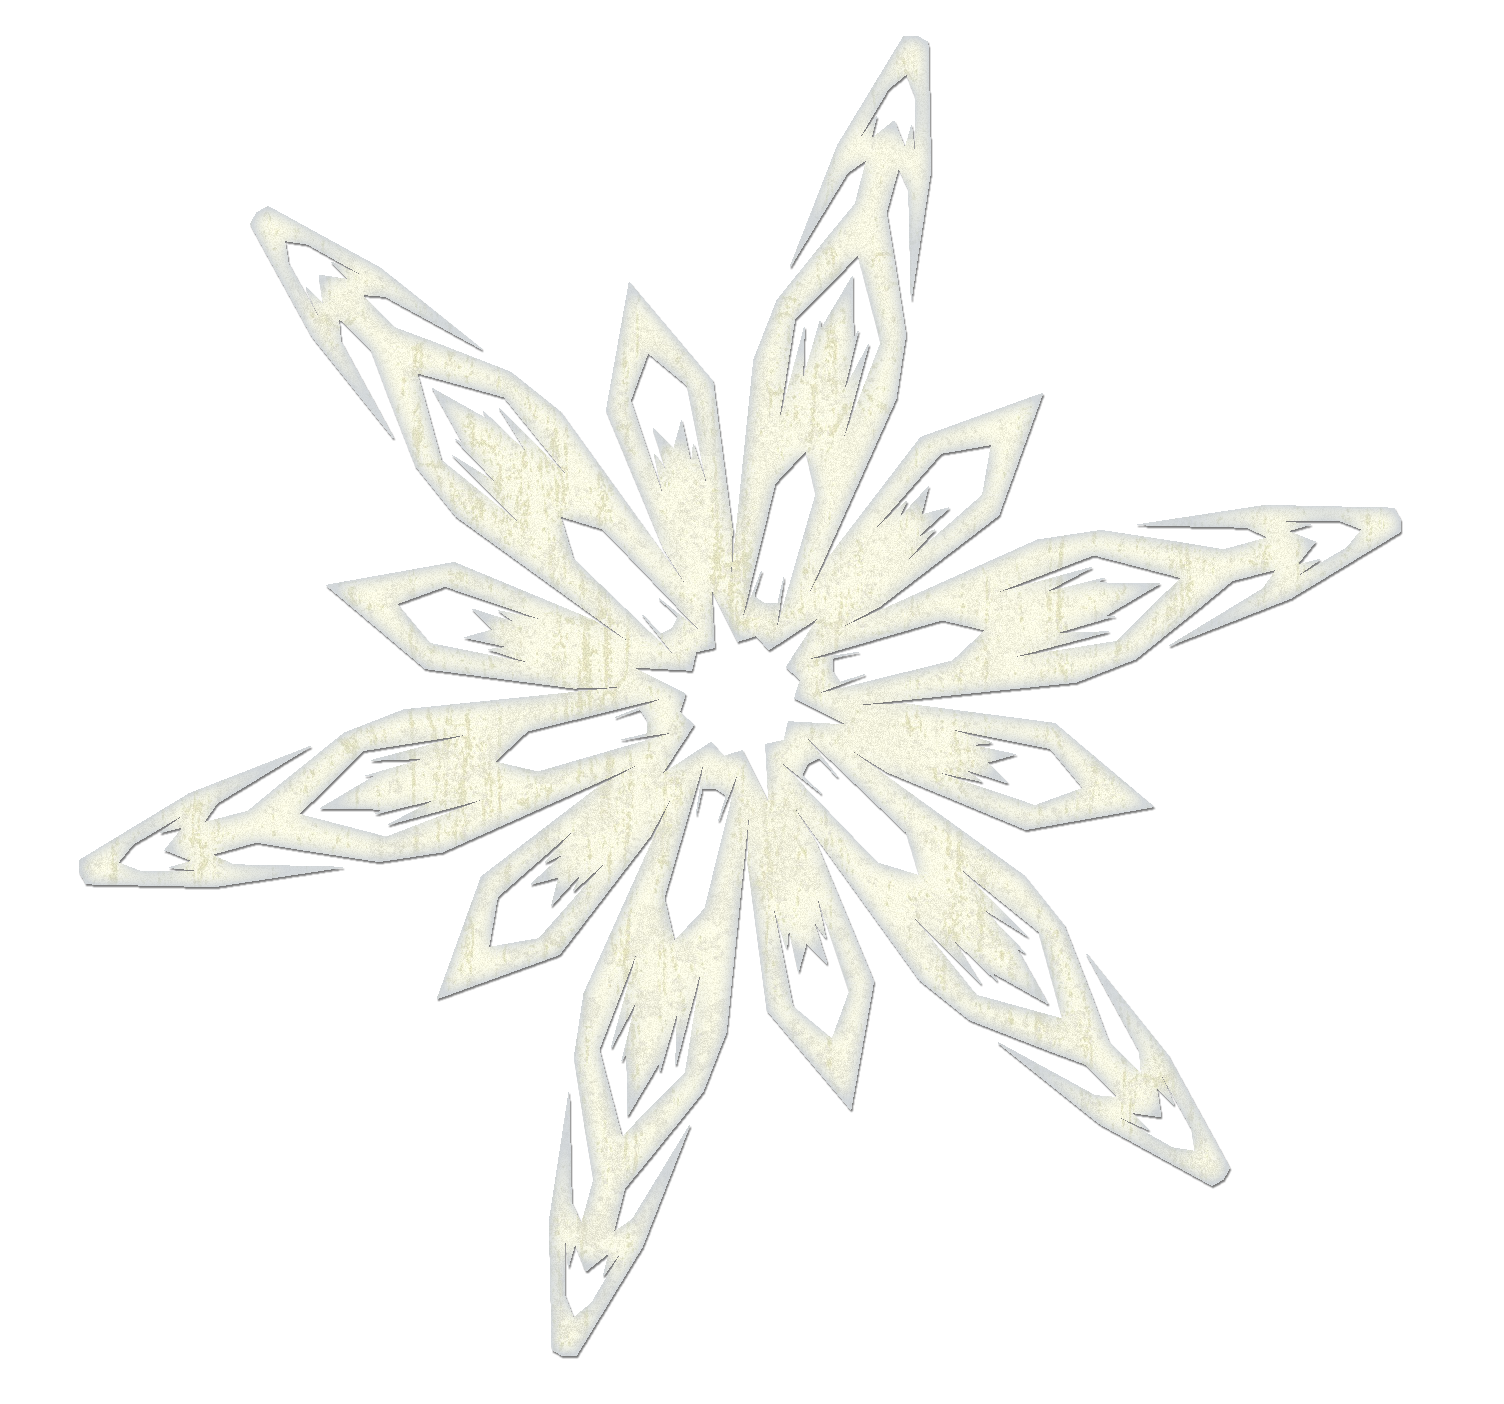 Snowflakes Download Free PNG